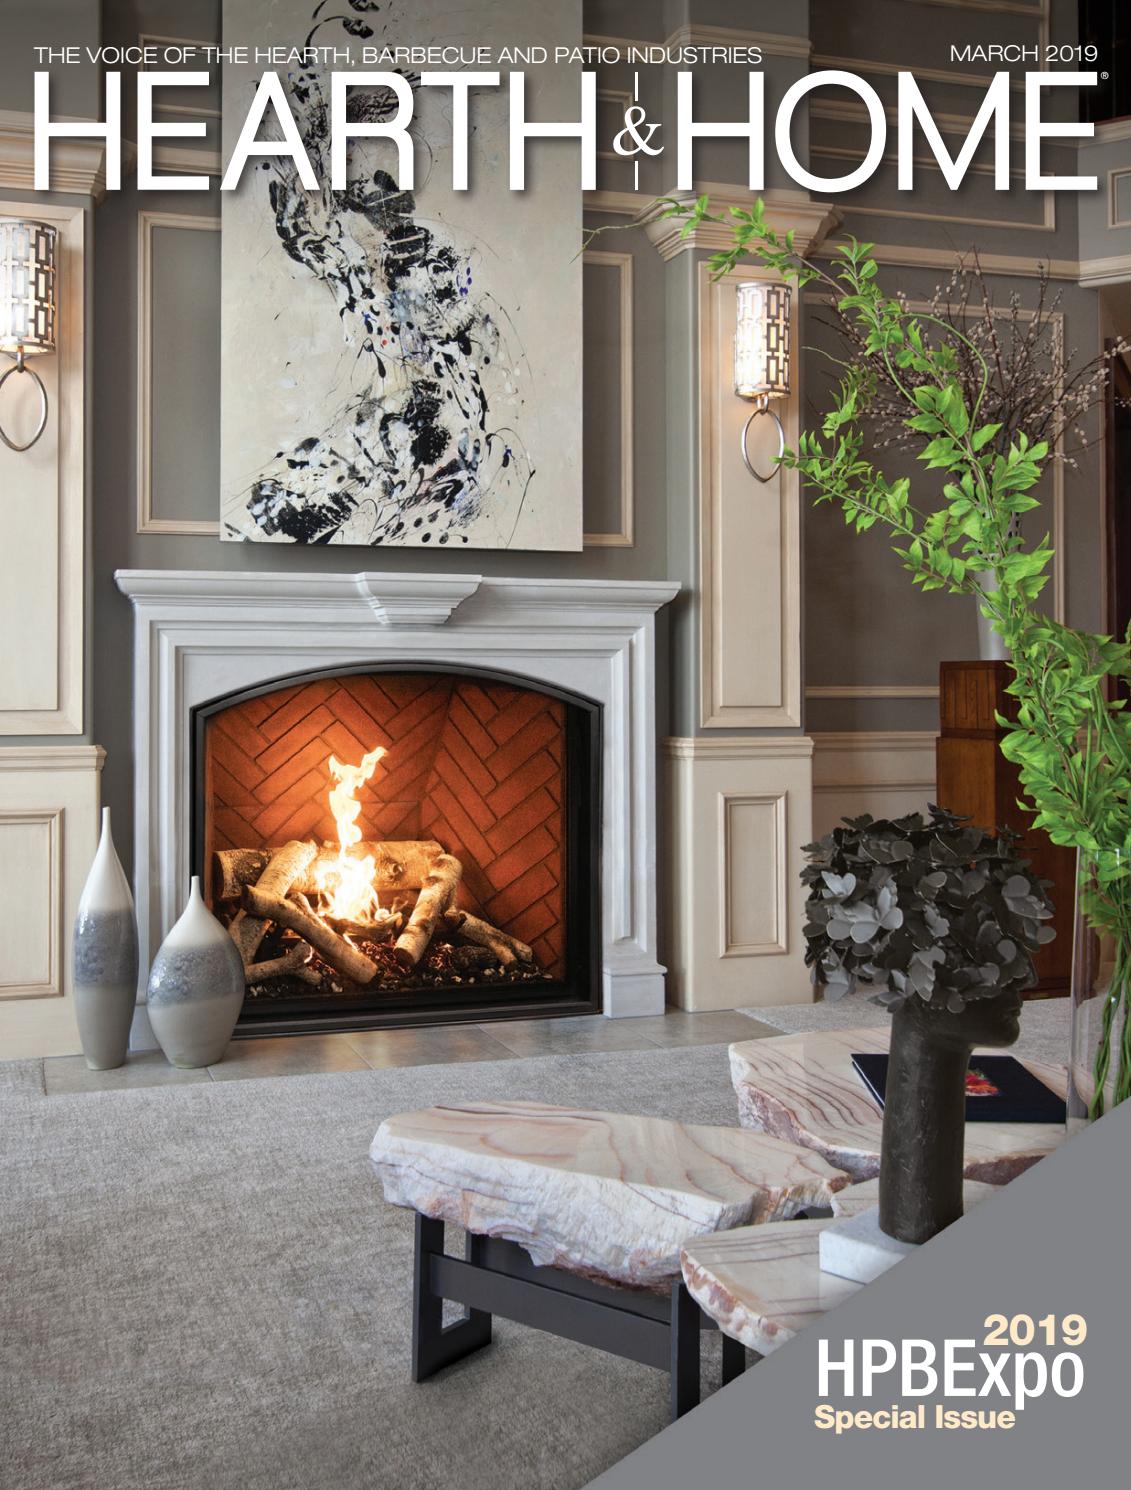 Hearthside Fireplace and Patio Inspirational Hearth &amp; Home Magazine – 2019 March issue by Hearth &amp; Home